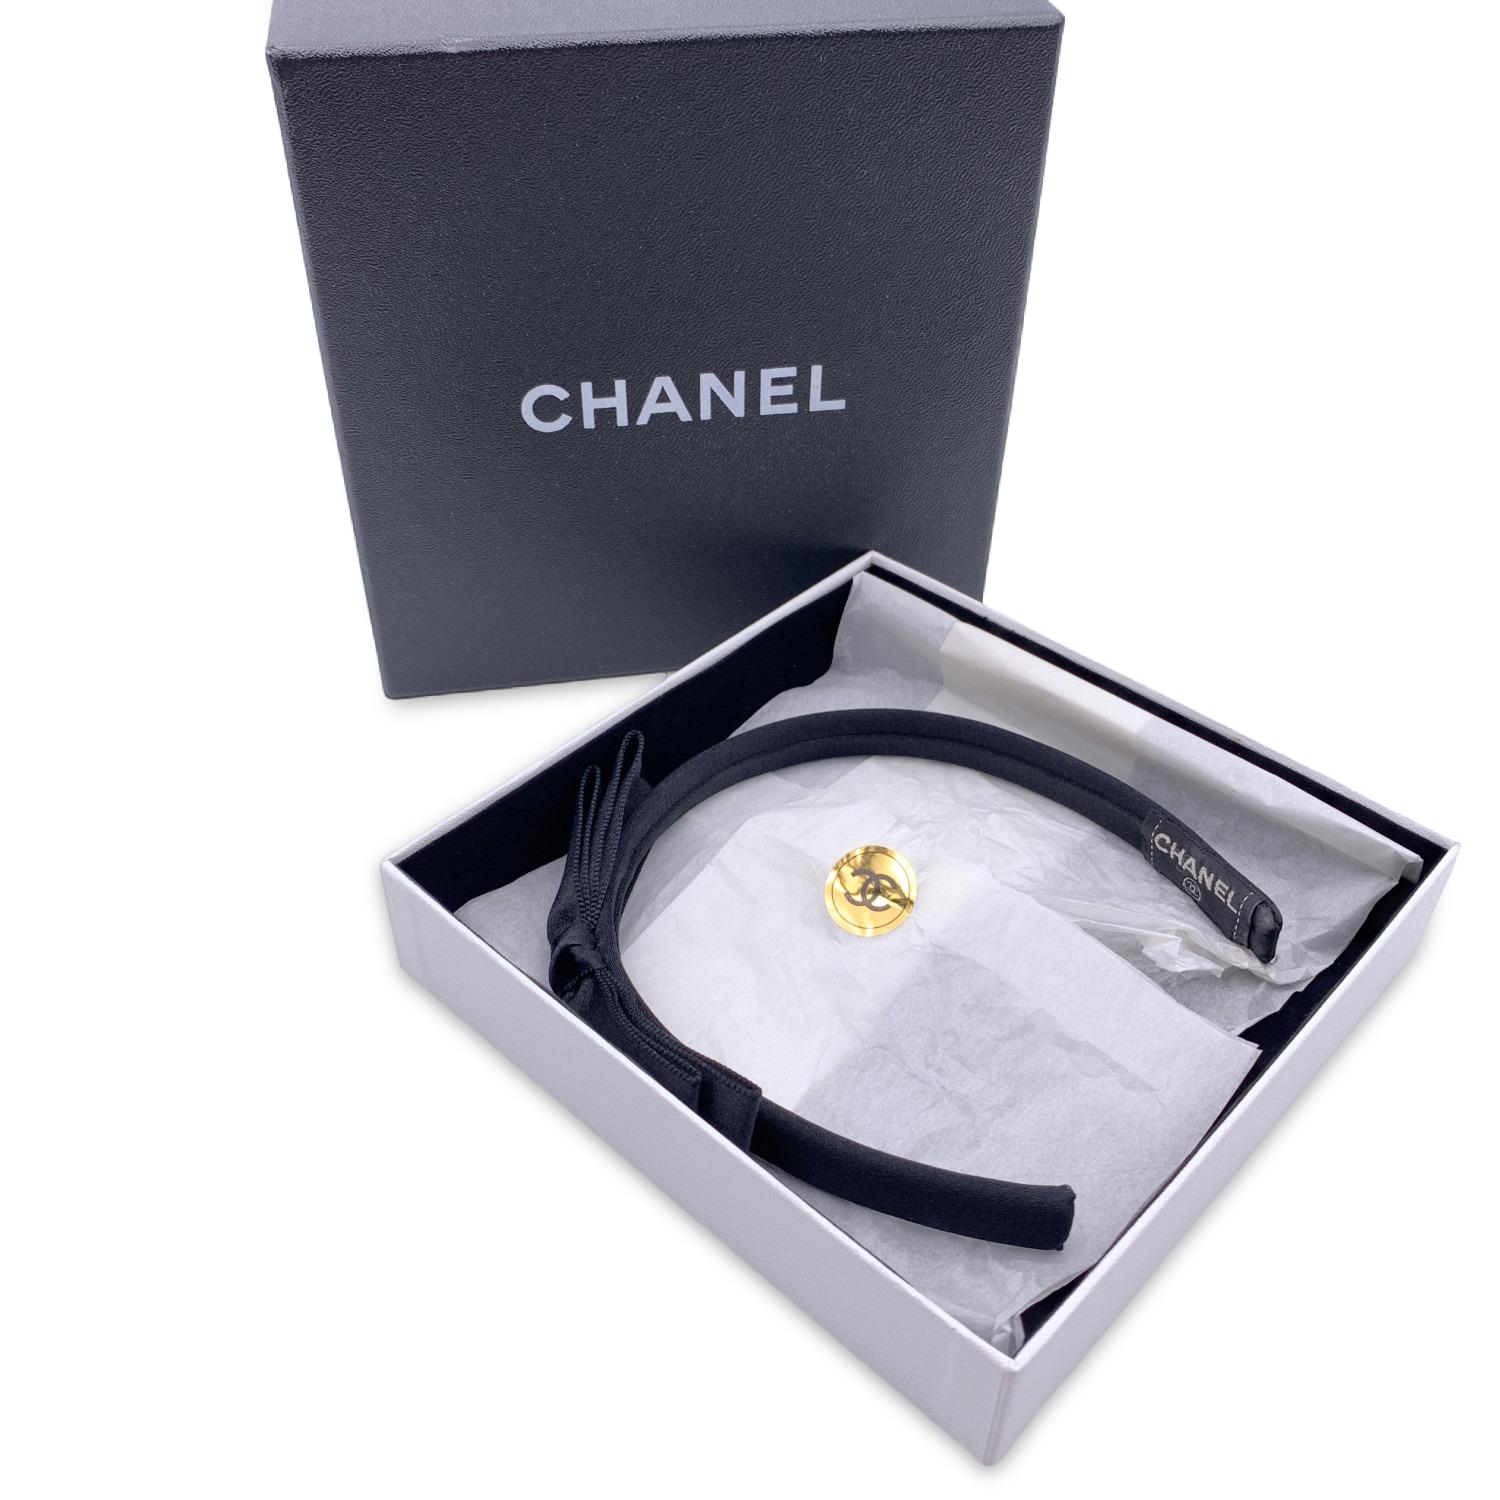 Lovely Chanel headband in black silk satin embellished with the a bow. 'Chanel' tag. Chanel box included


Details

MATERIAL: Silk

COLOR: Black

MODEL: -

GENDER: Women

COUNTRY OF MANUFACTURE: France

SIZE: One Size

TYPE: Headband

YEAR